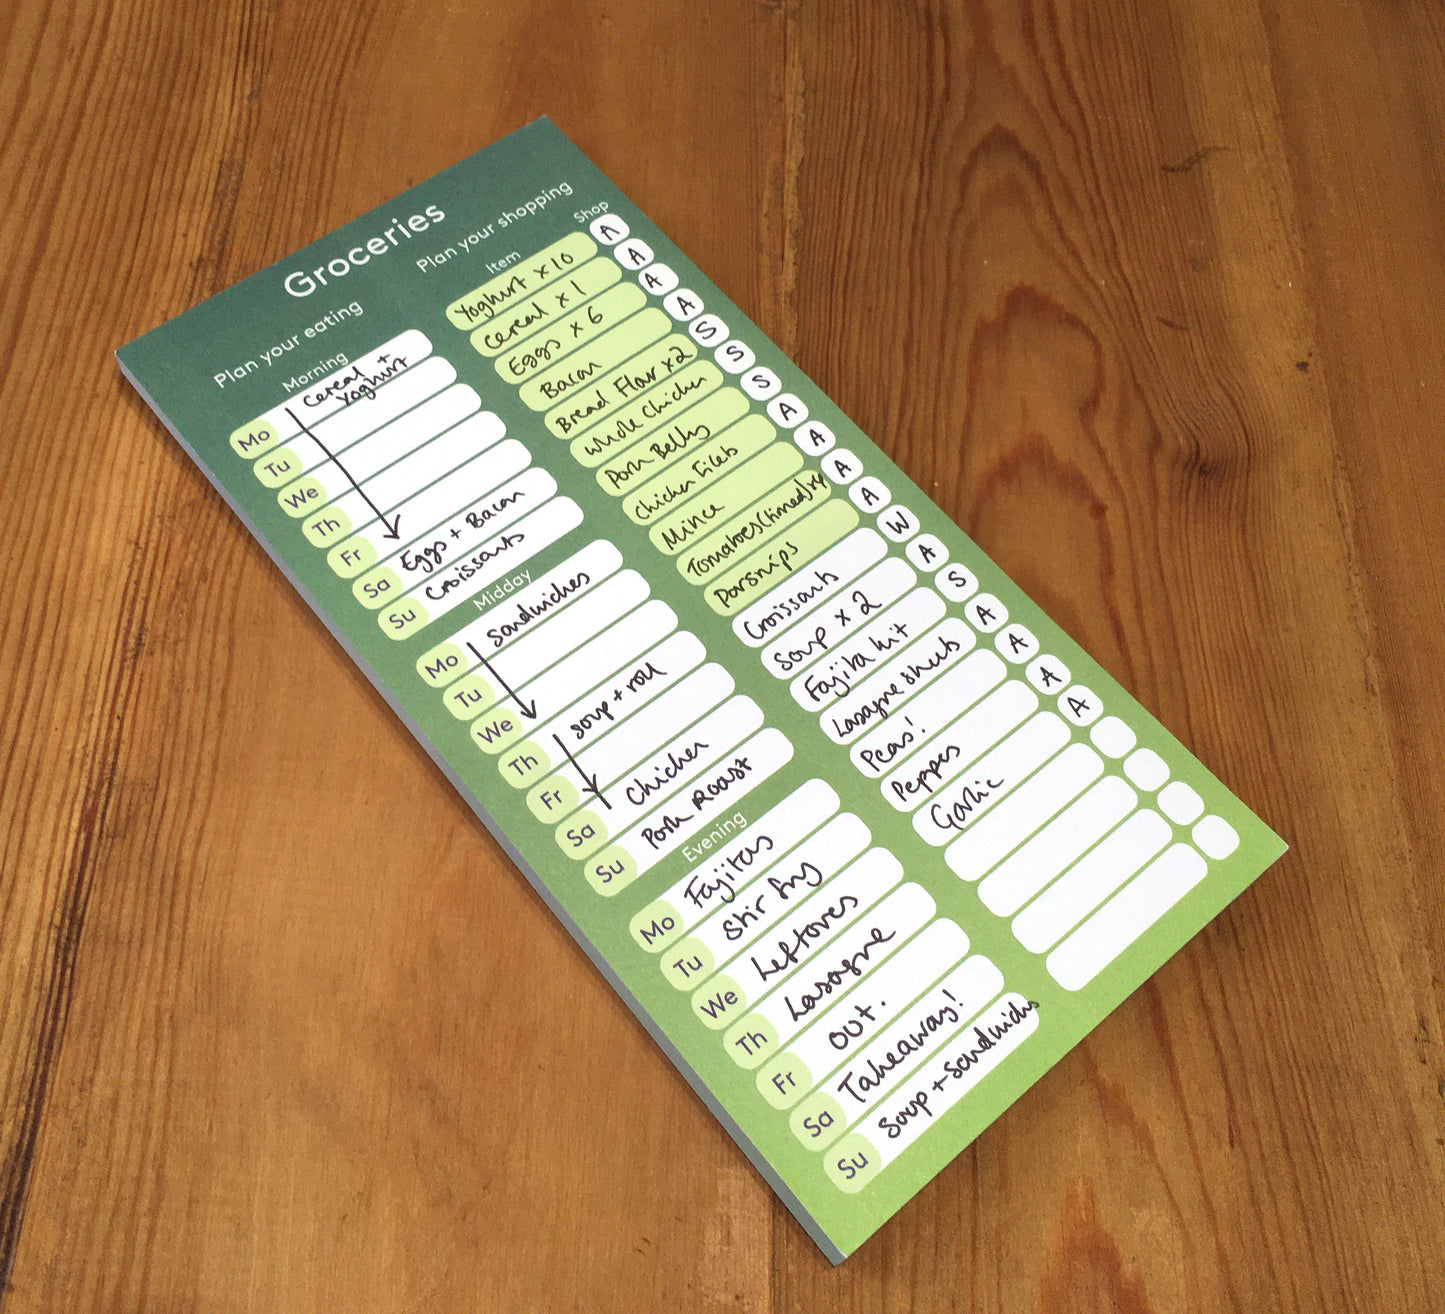 Groceries notepad